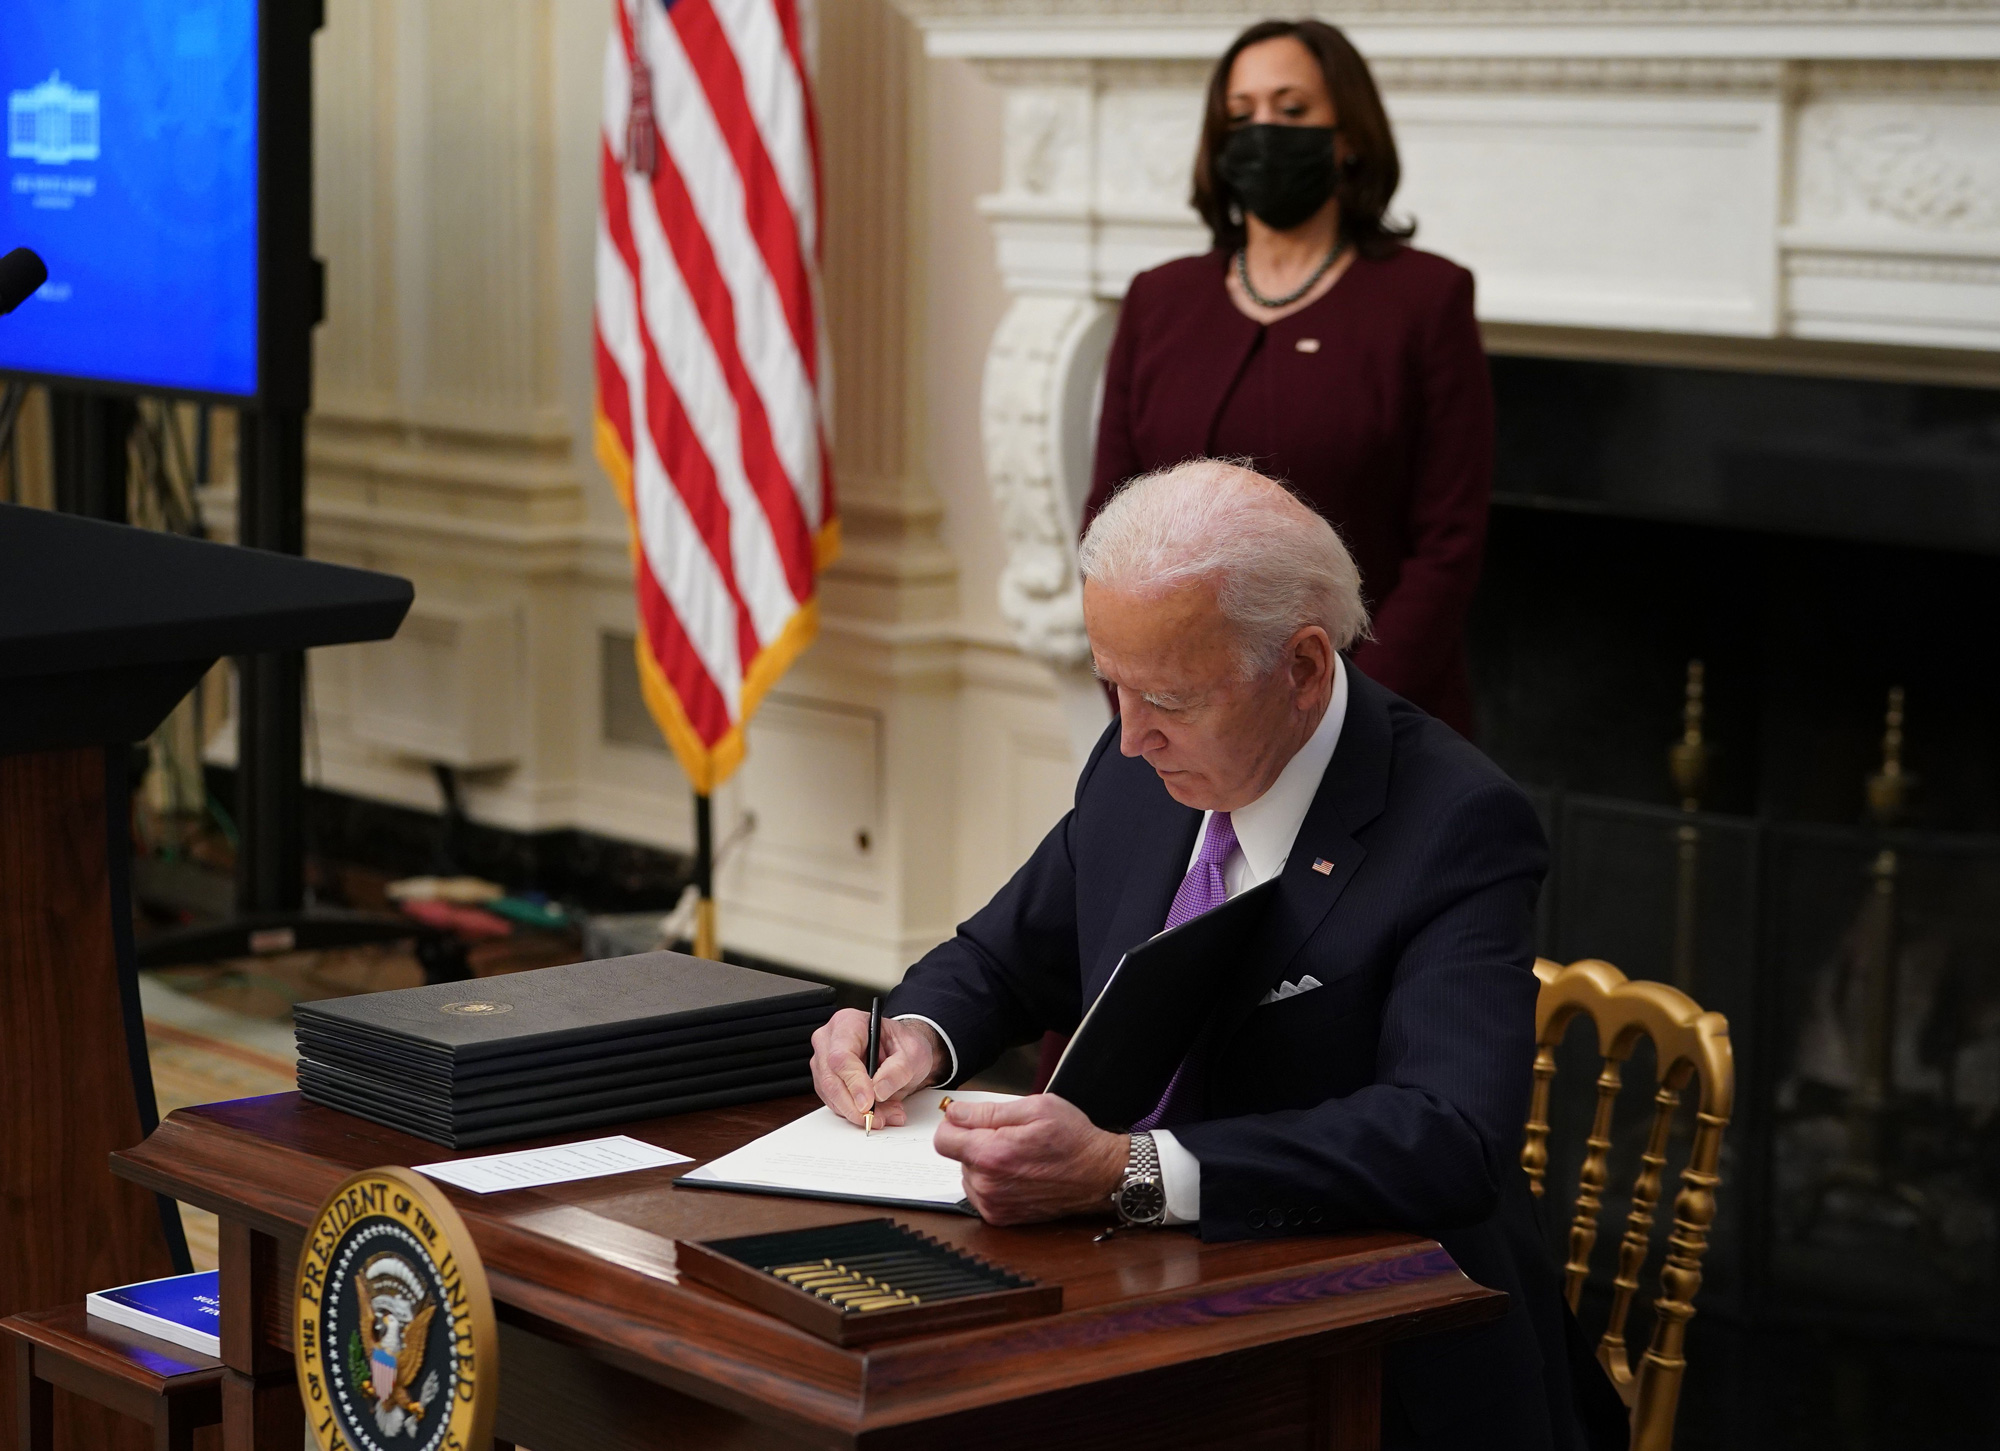 President Joe Biden signs an executive order promoting safe travel as part of the Covid-19 response in the State Dining Room of the White House in Washington, DC, on January 21.